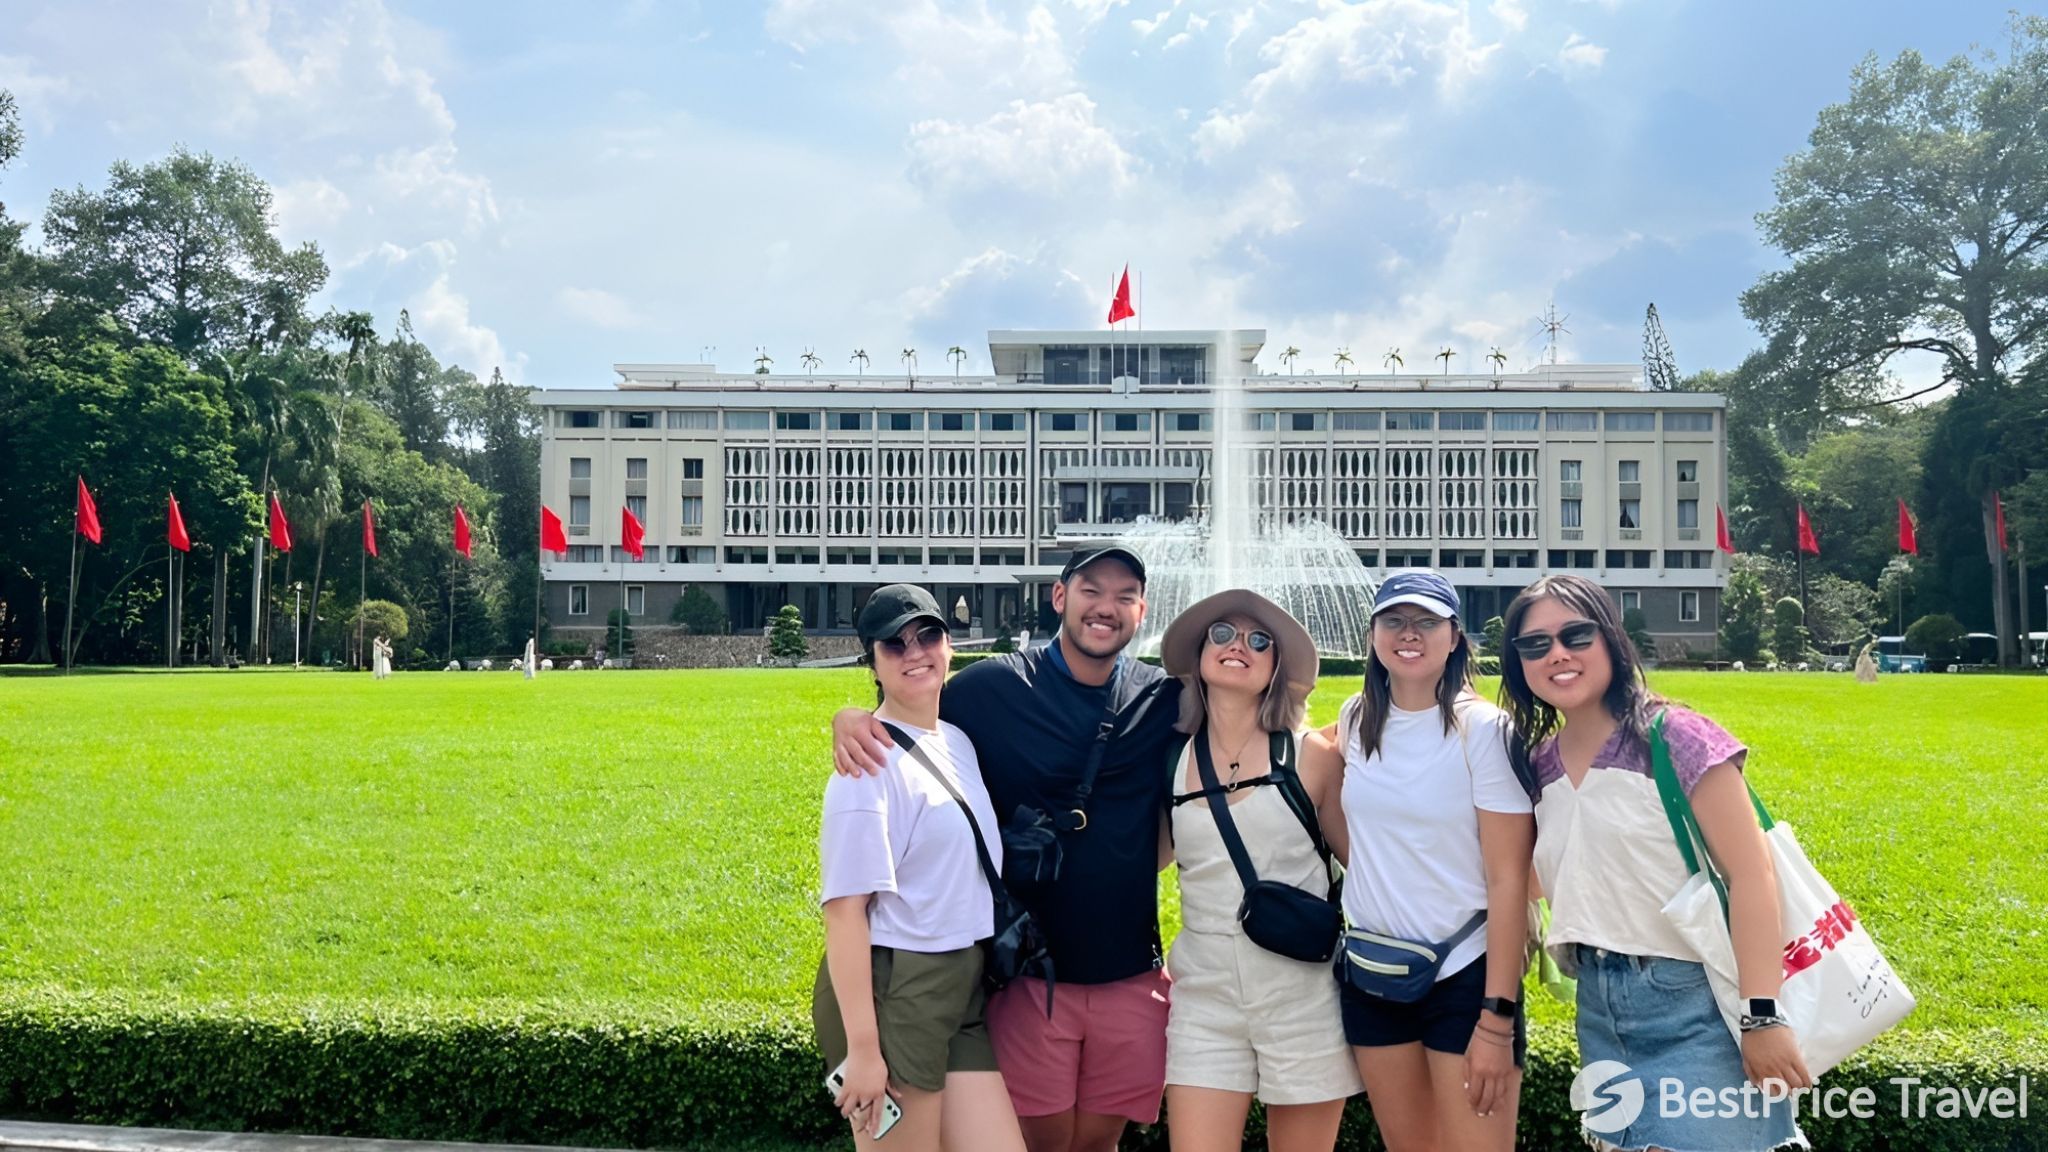 Day 12 Take Pictures With The Reunification Palace